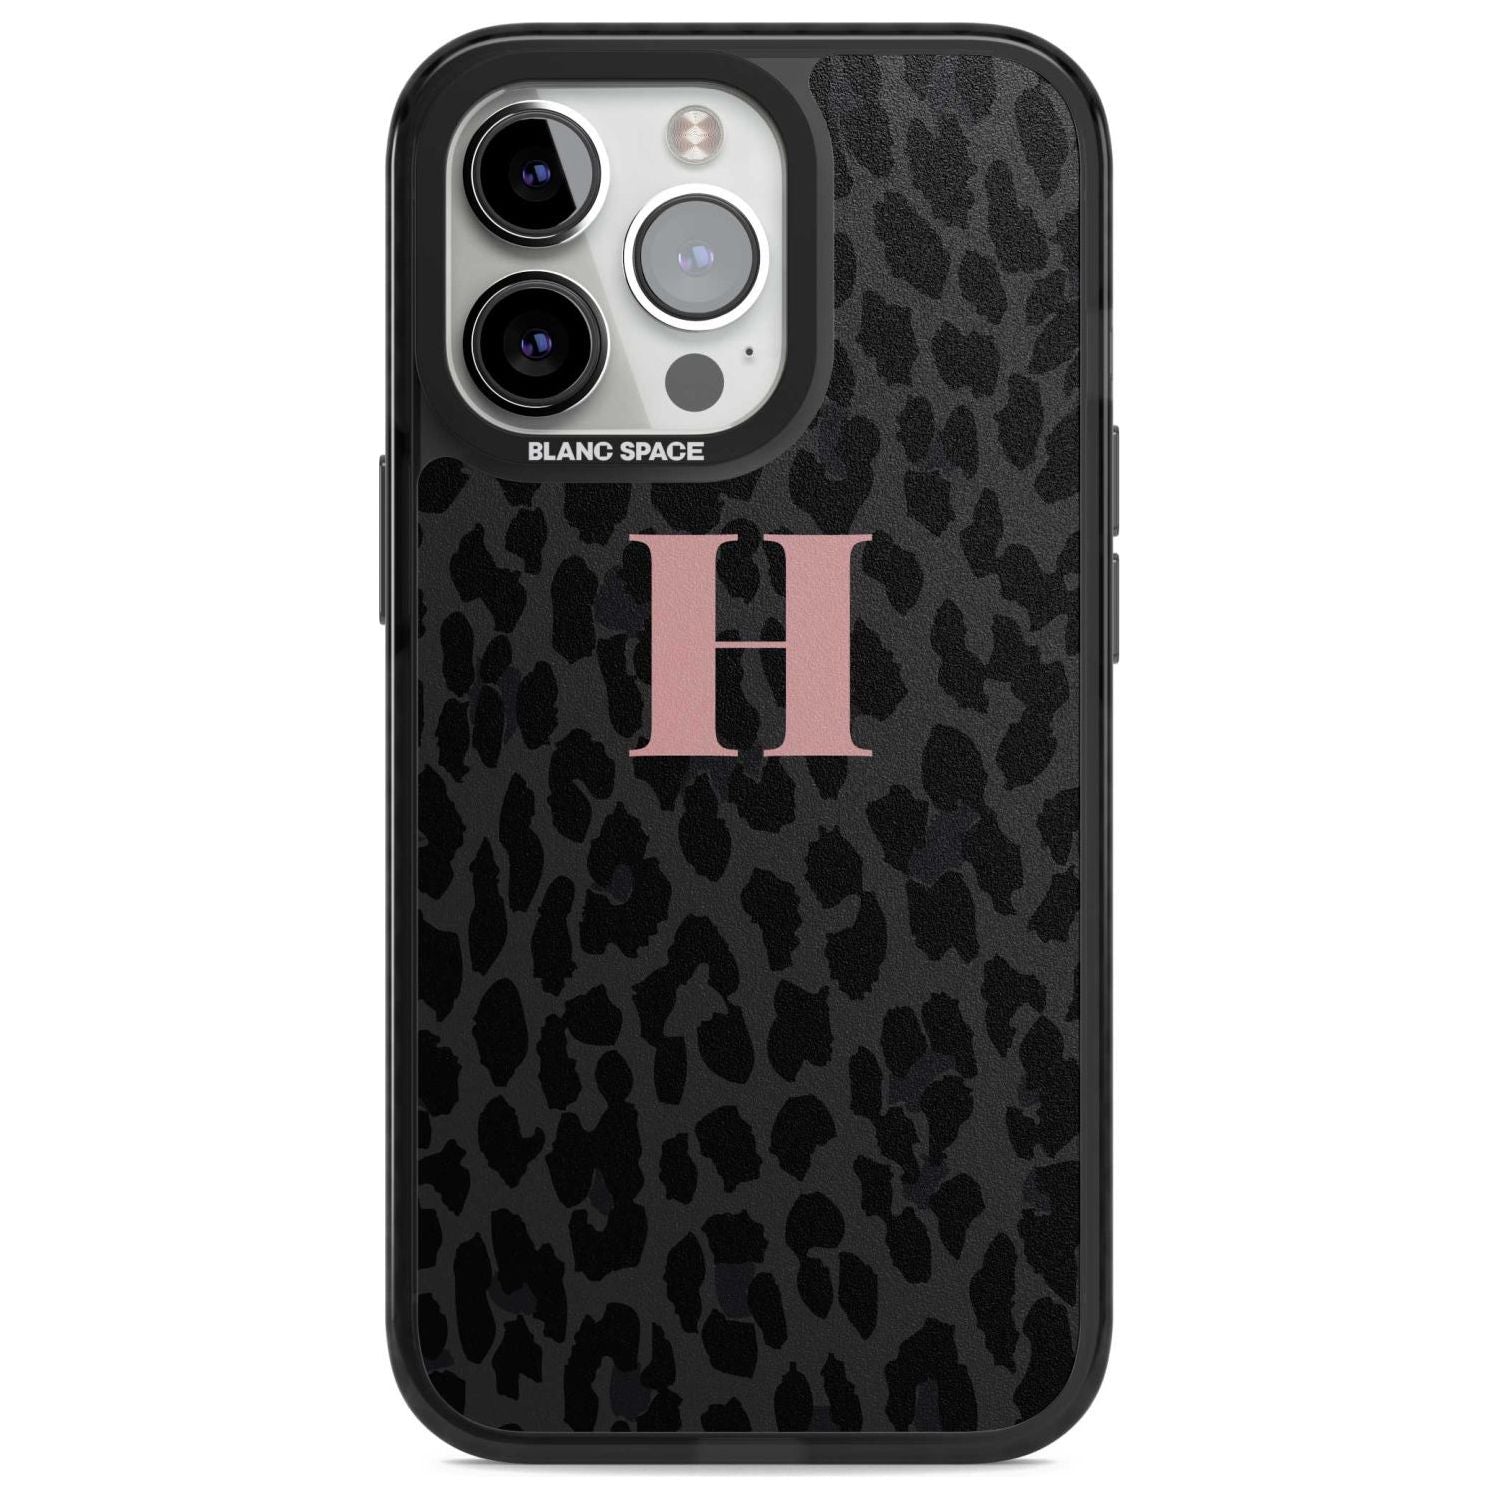 Personalised Small Pink Leopard Monogram Custom Phone Case iPhone 15 Pro Max / Magsafe Black Impact Case,iPhone 15 Pro / Magsafe Black Impact Case,iPhone 14 Pro Max / Magsafe Black Impact Case,iPhone 14 Pro / Magsafe Black Impact Case,iPhone 13 Pro / Magsafe Black Impact Case Blanc Space